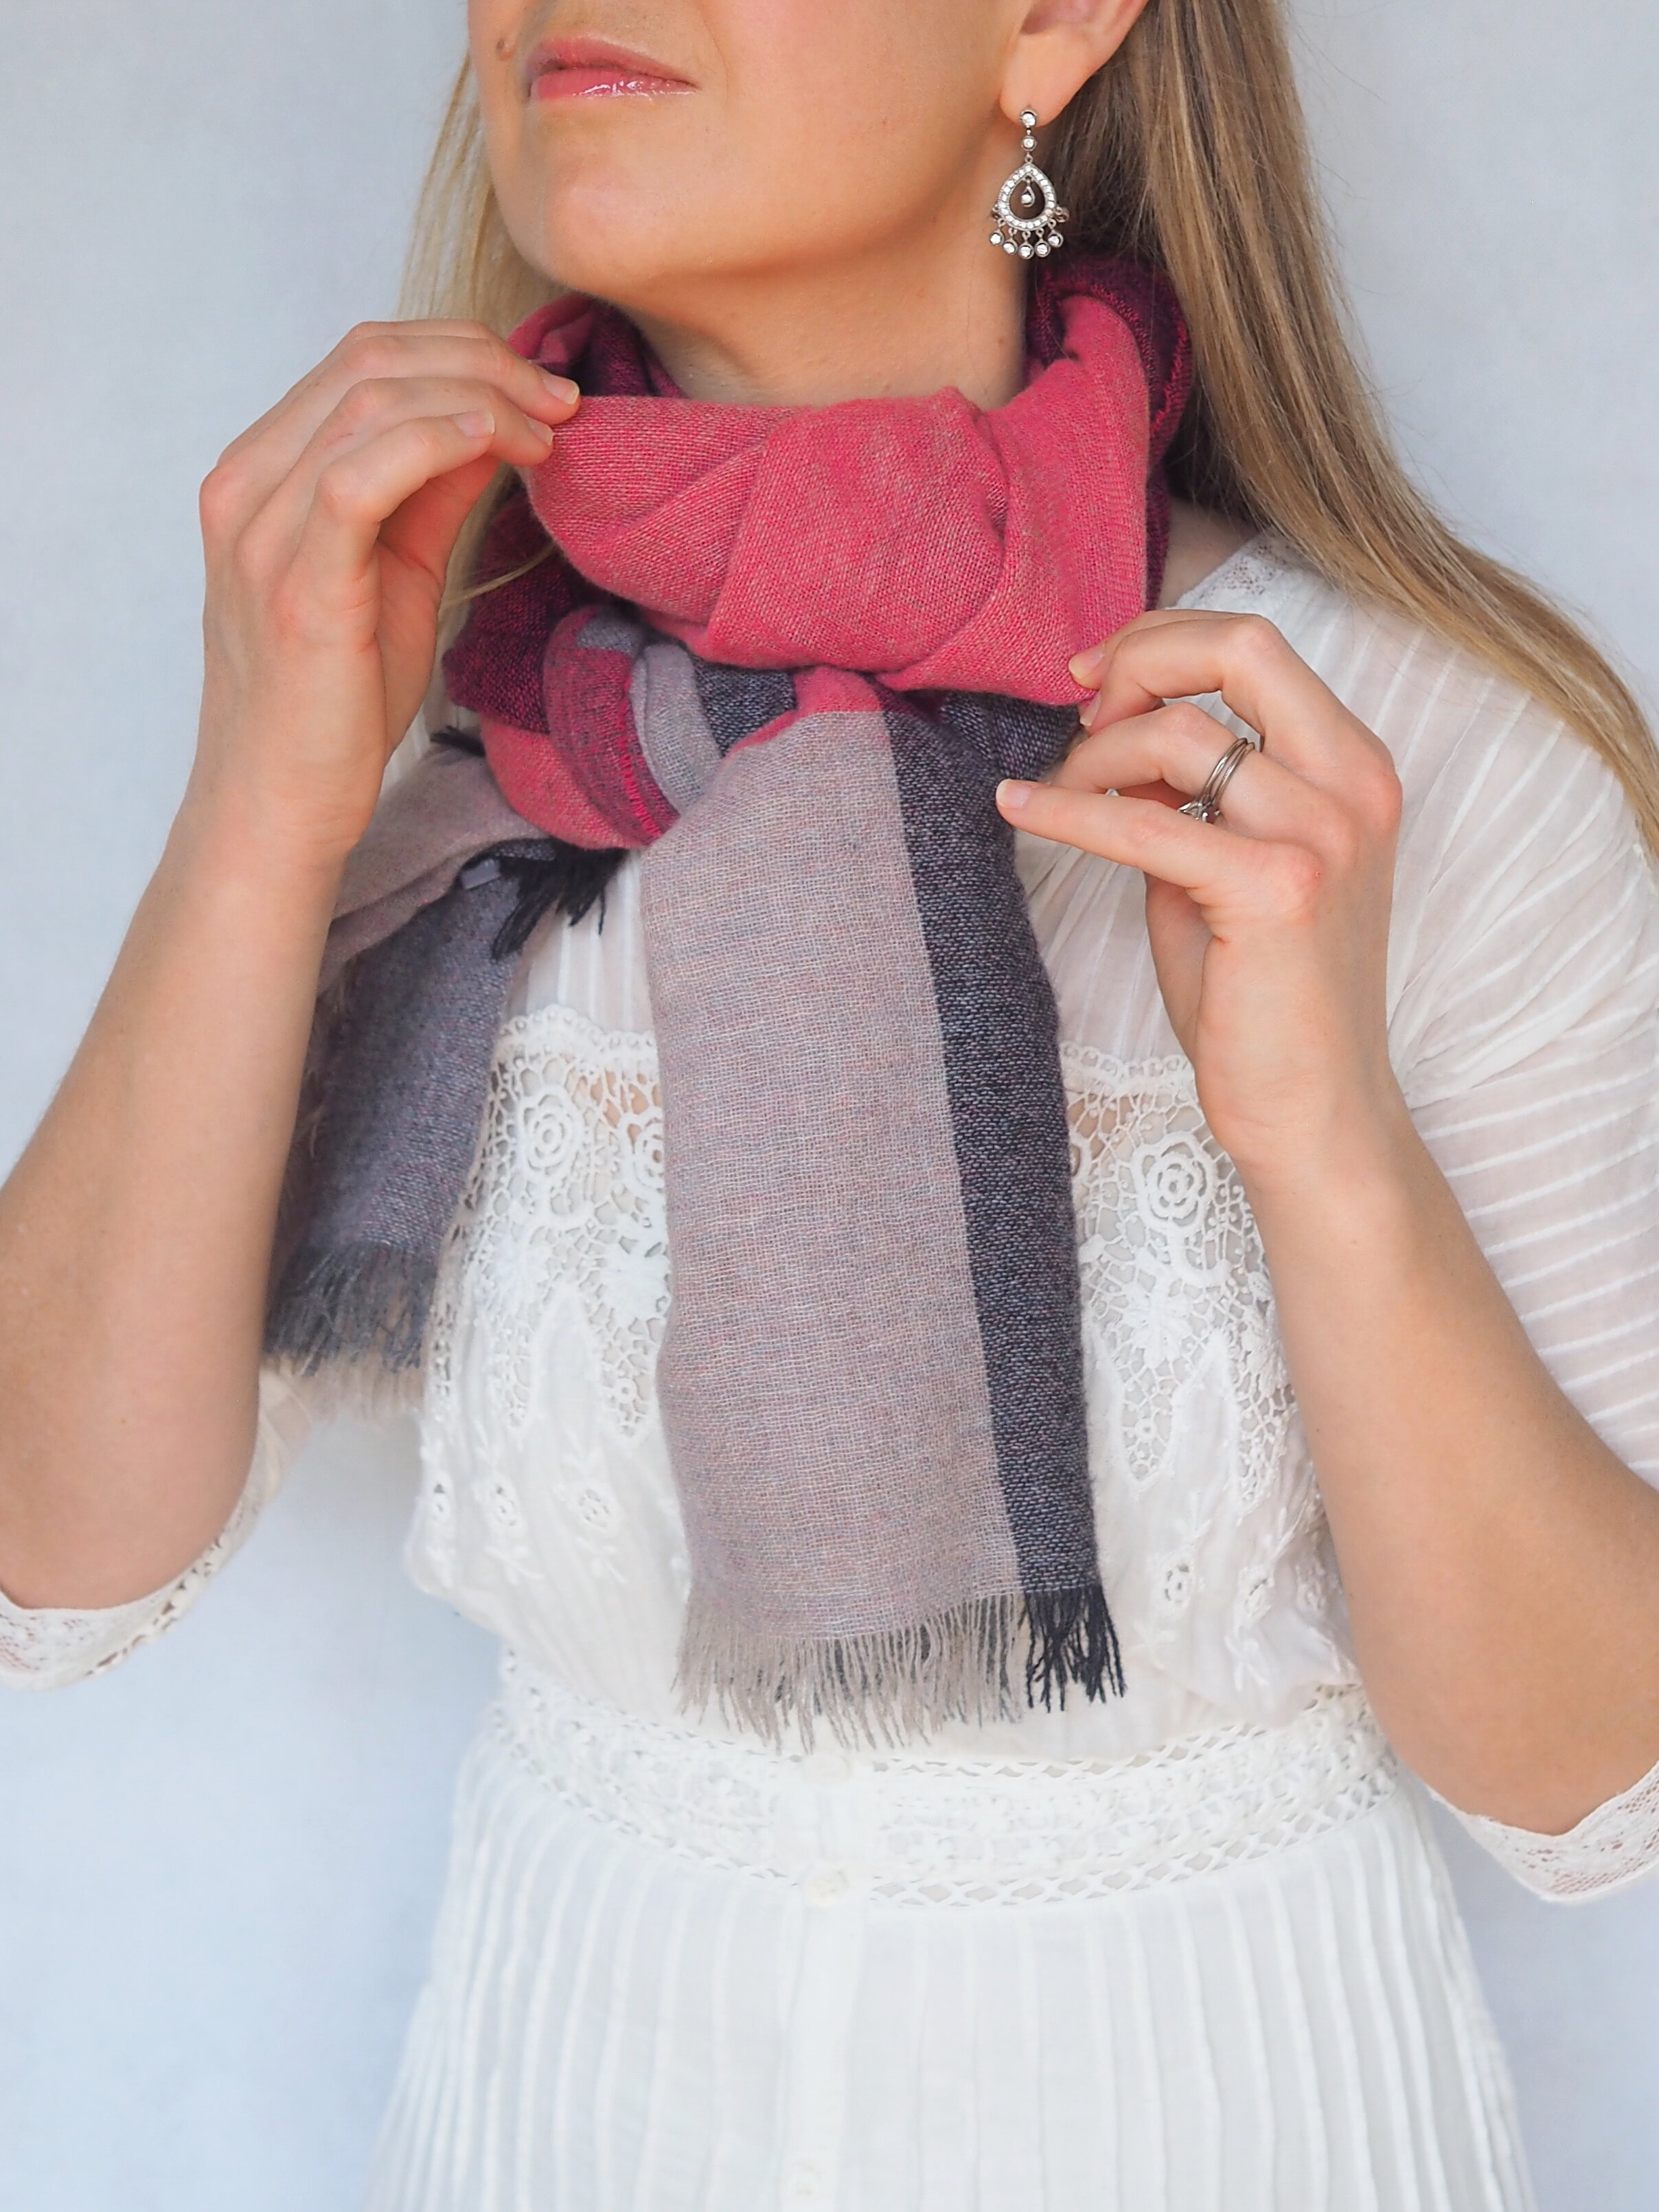 How to Tie a Scarf the Lois Avery Way: 3 Styles for Spring — Lois Avery